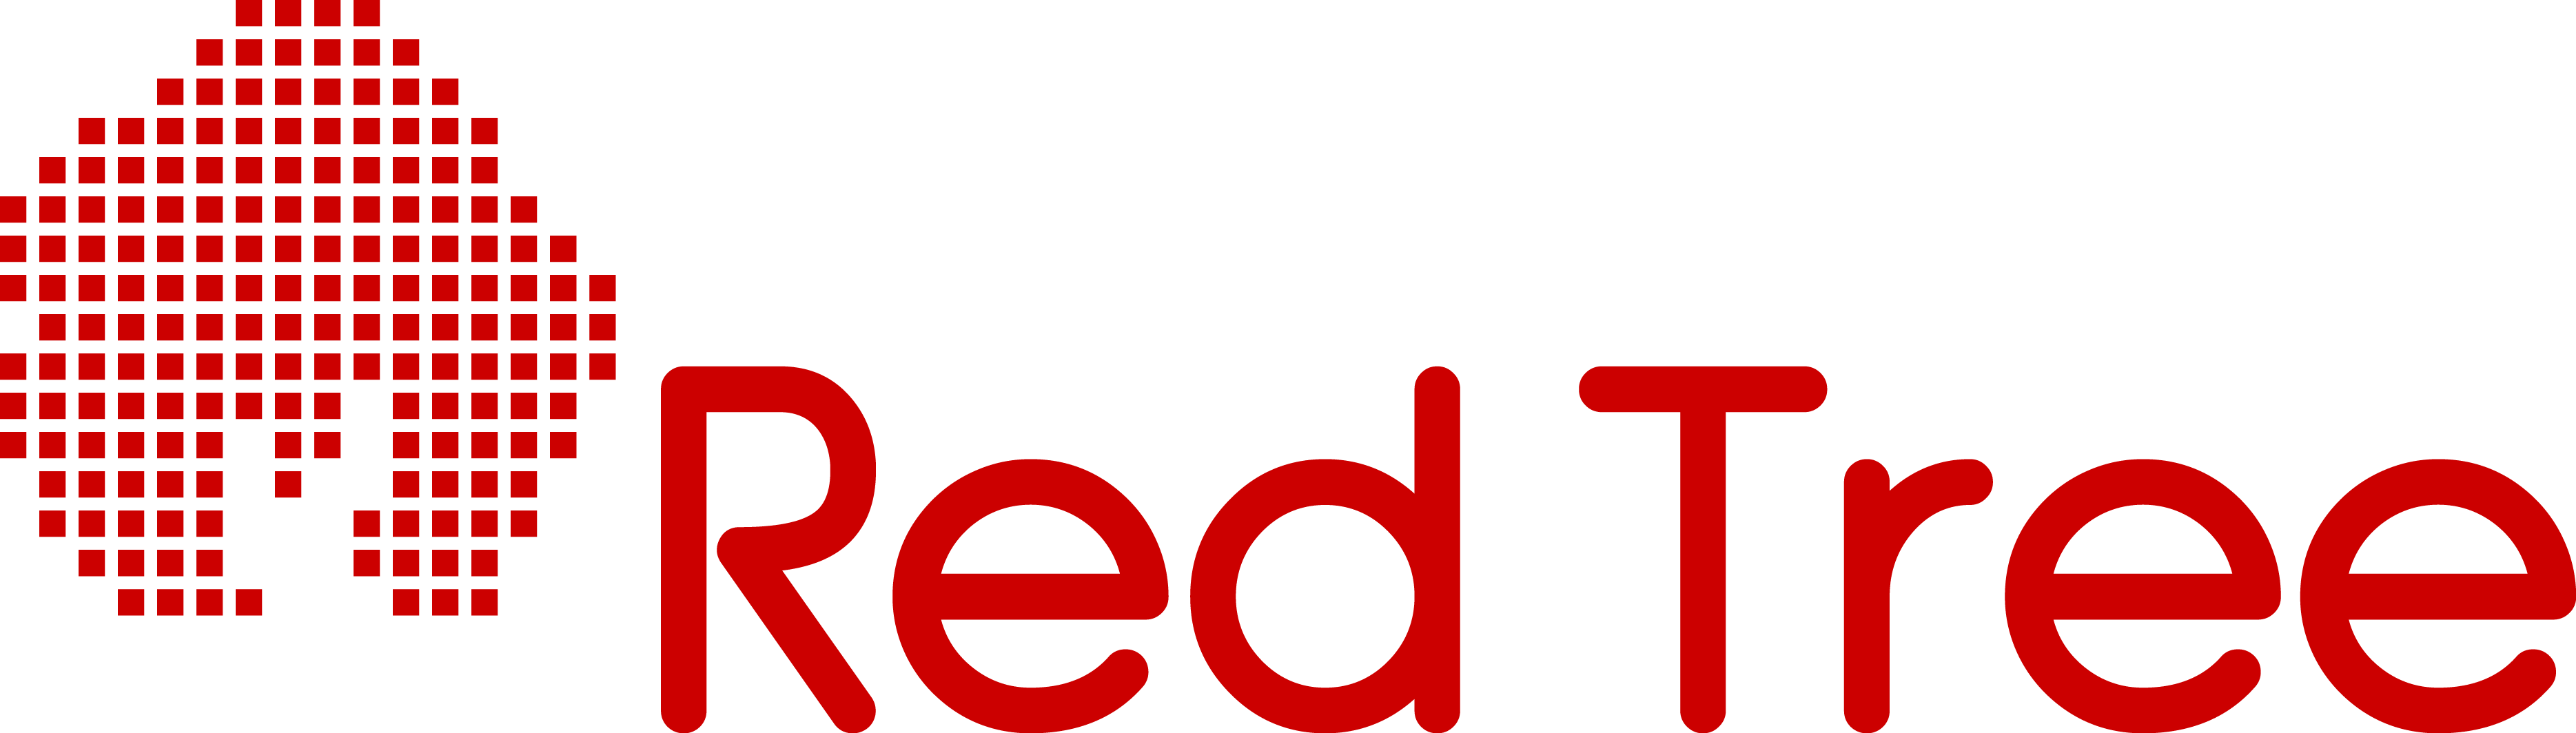 Tree with Red Logo - Full Service Digital Agency Jakarta, Indonesia | Red Tree Asia